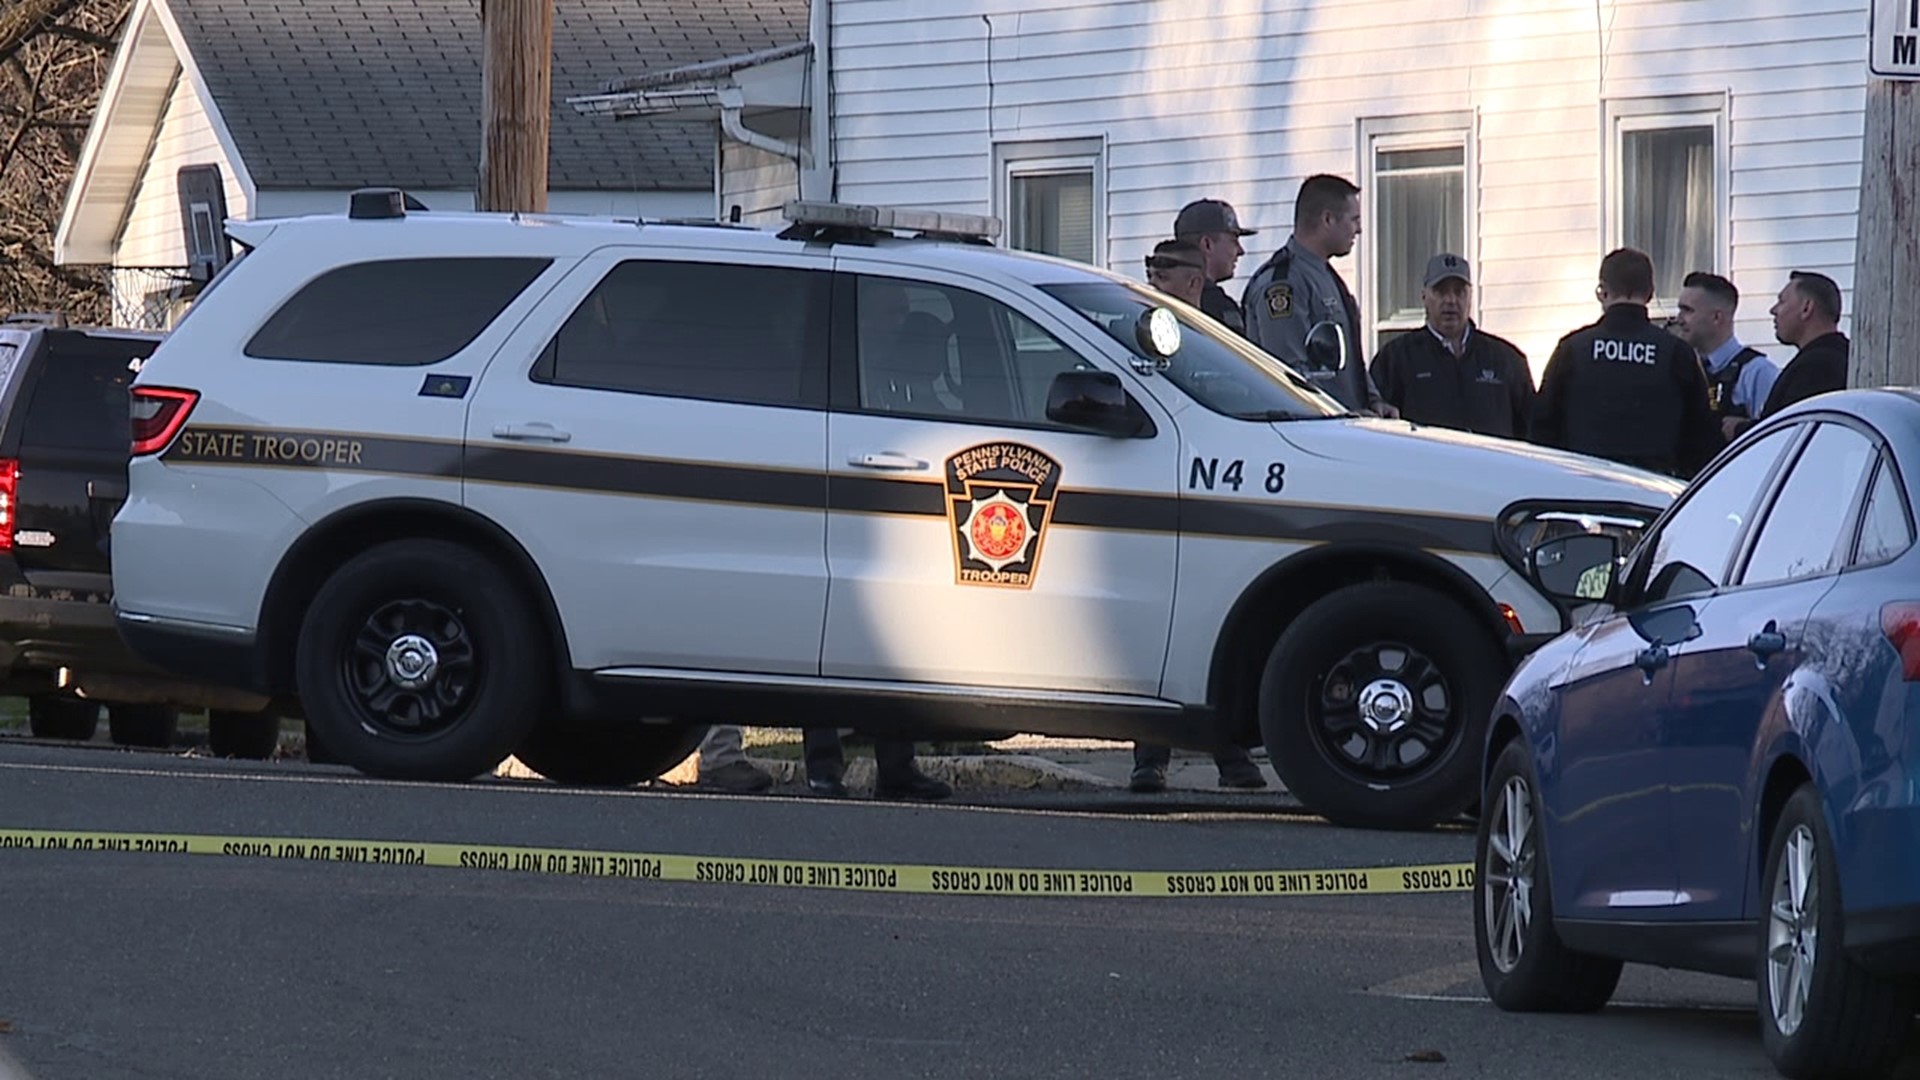 According to investigators, an argument between neighbors led to a gruesome homicide in Lehighton on Monday.